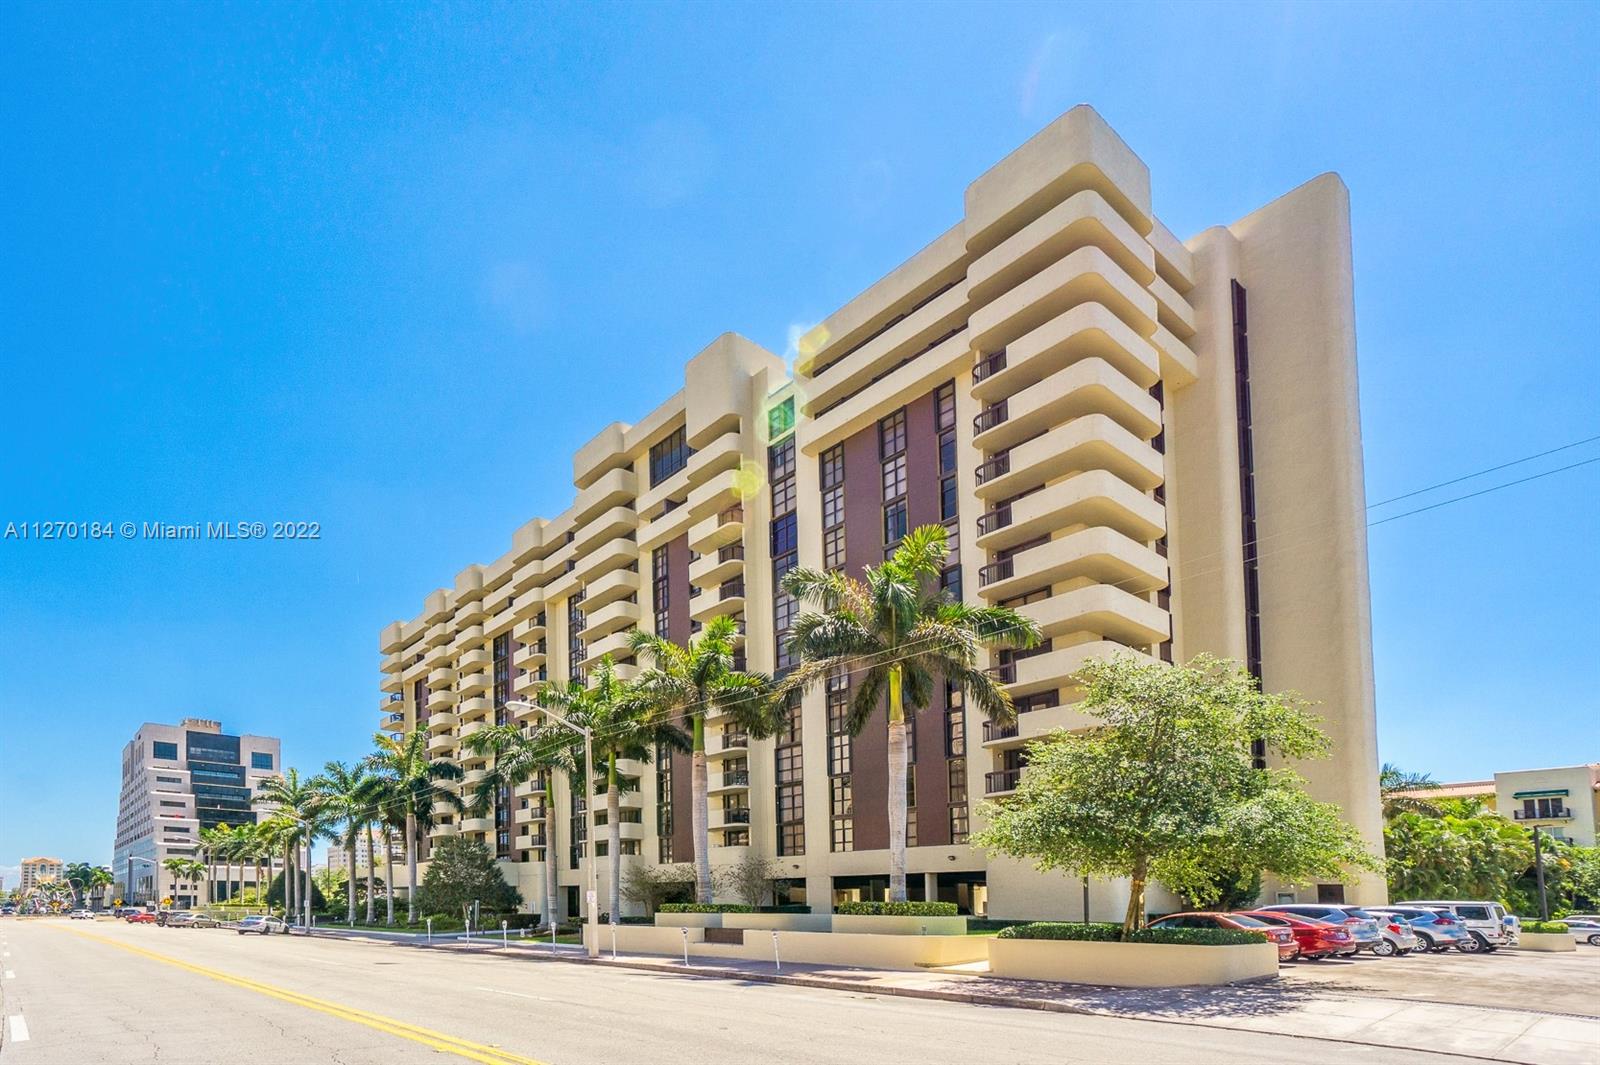 Enjoy living in the heart of Coral Gables walking distance to Downtown Gables, Miracle Mile shops & restaurants, Publix, and the Granada & Biltmore golf courses! Spacious 2-bedroom unit at Biltmore II with a split floor plan, tile floors throughout, a large walk-in primary closet, and an oversized balcony. Impressive lobby atrium with glass elevators and a 24-hour concierge/doorman. Building amenities include a fitness center, social rooms, lap pool & billiard room. Storage unit included. Assessment is being paid by Seller. Easy to show!